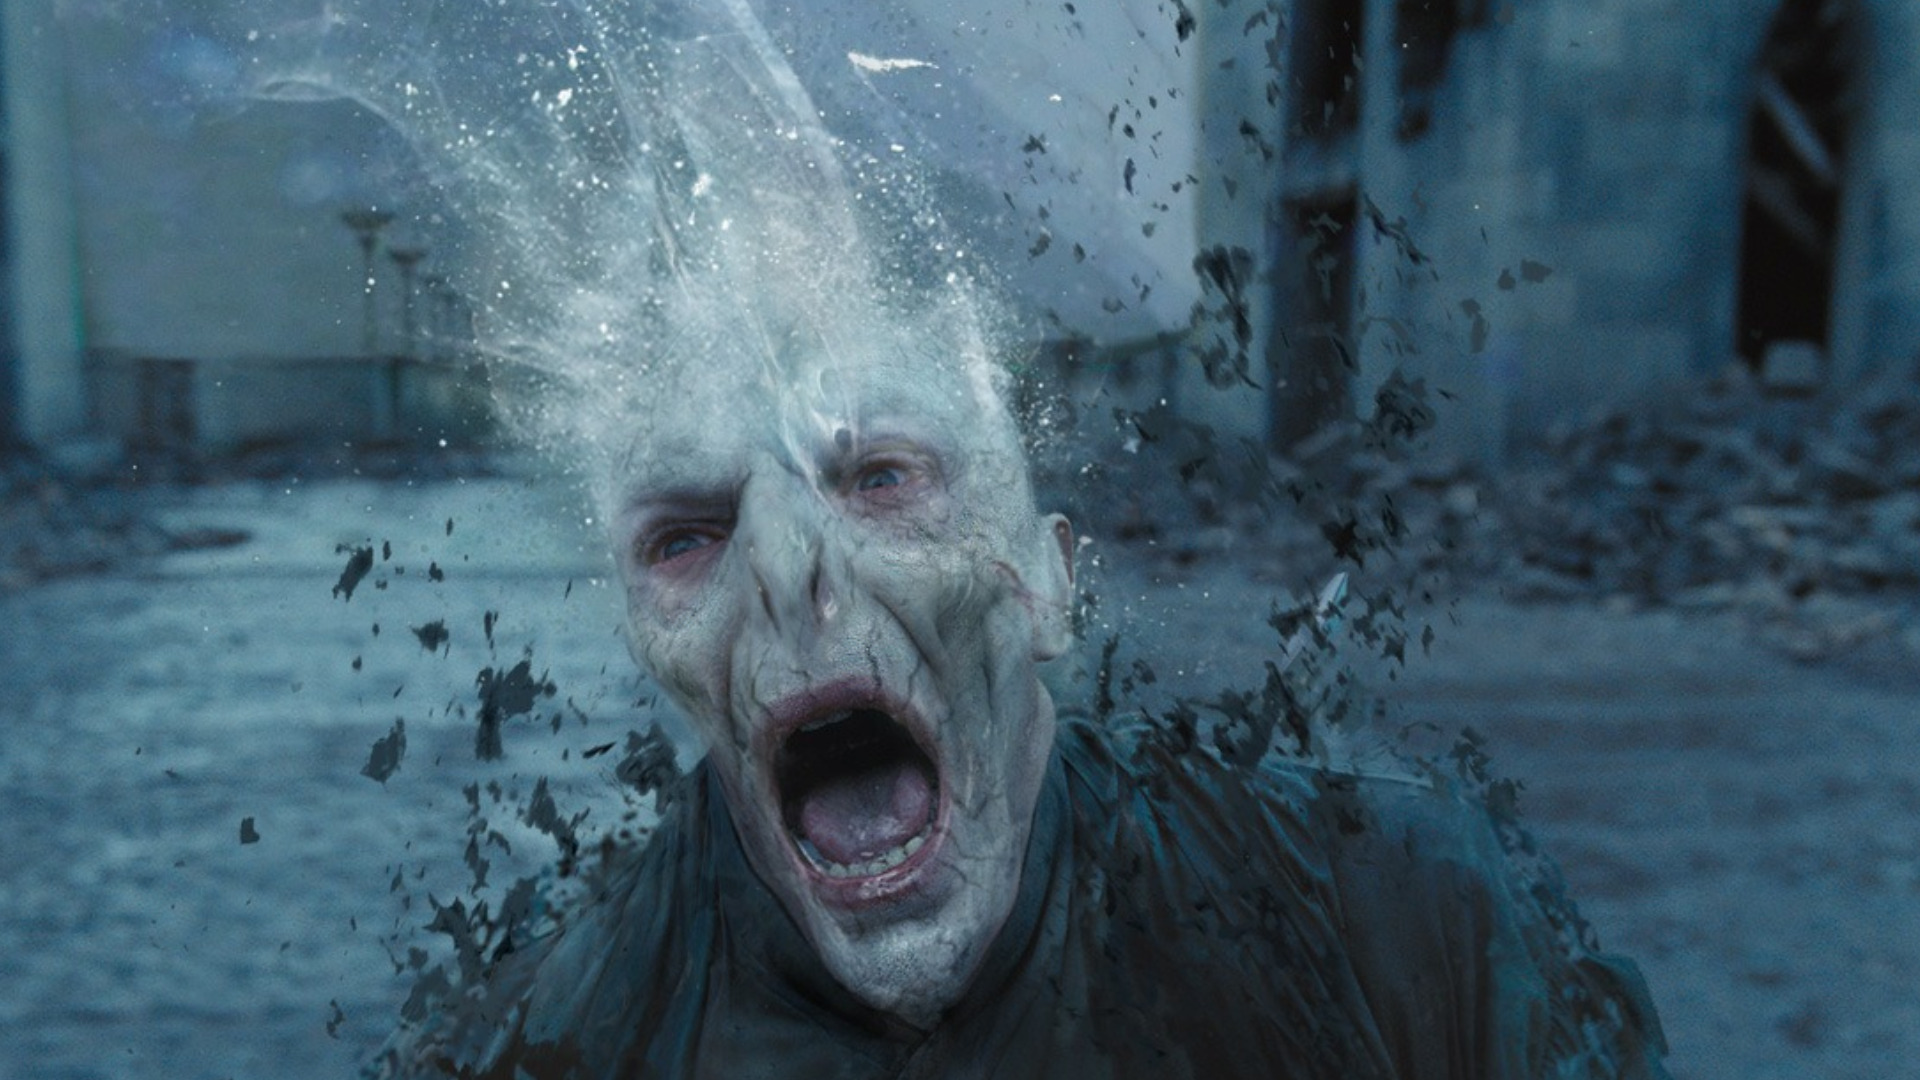 harry potter, movie, harry potter and the deathly hallows: part 2, lord voldemort